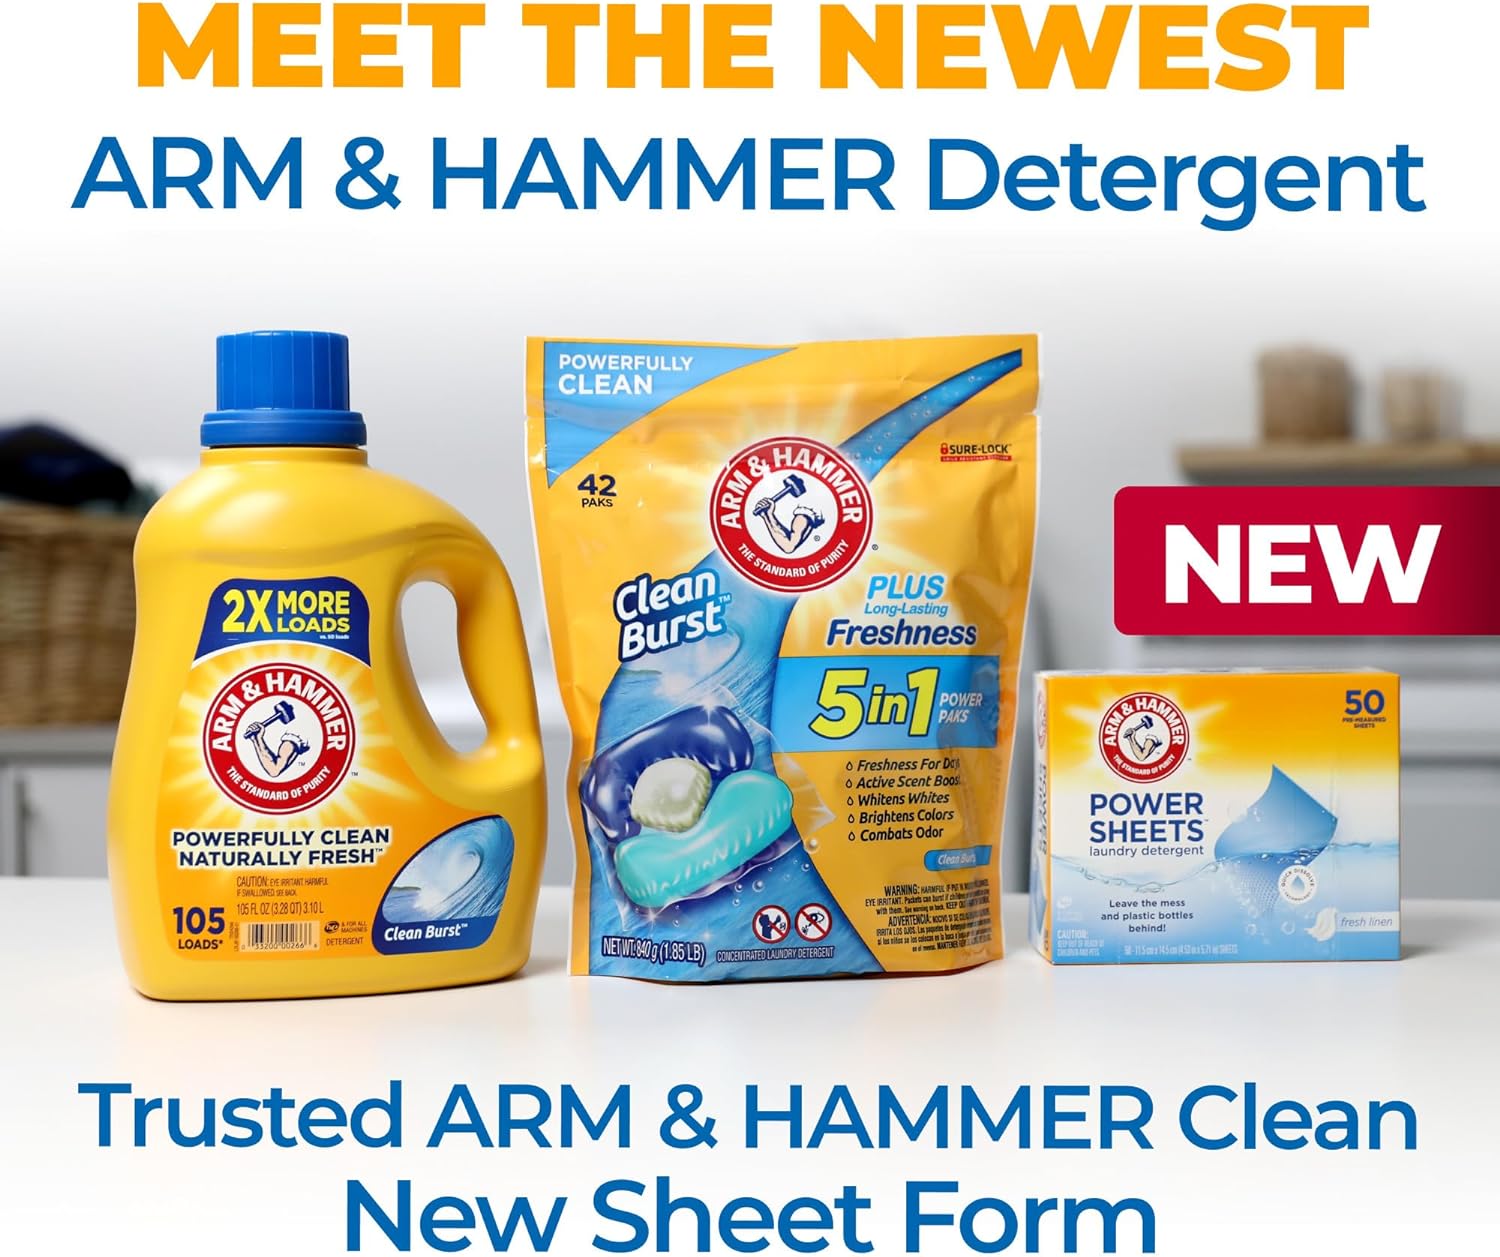 Arm & Hammer Power Sheets Laundry Detergent, Fresh Linen 50ct, up to 100 Small Loads